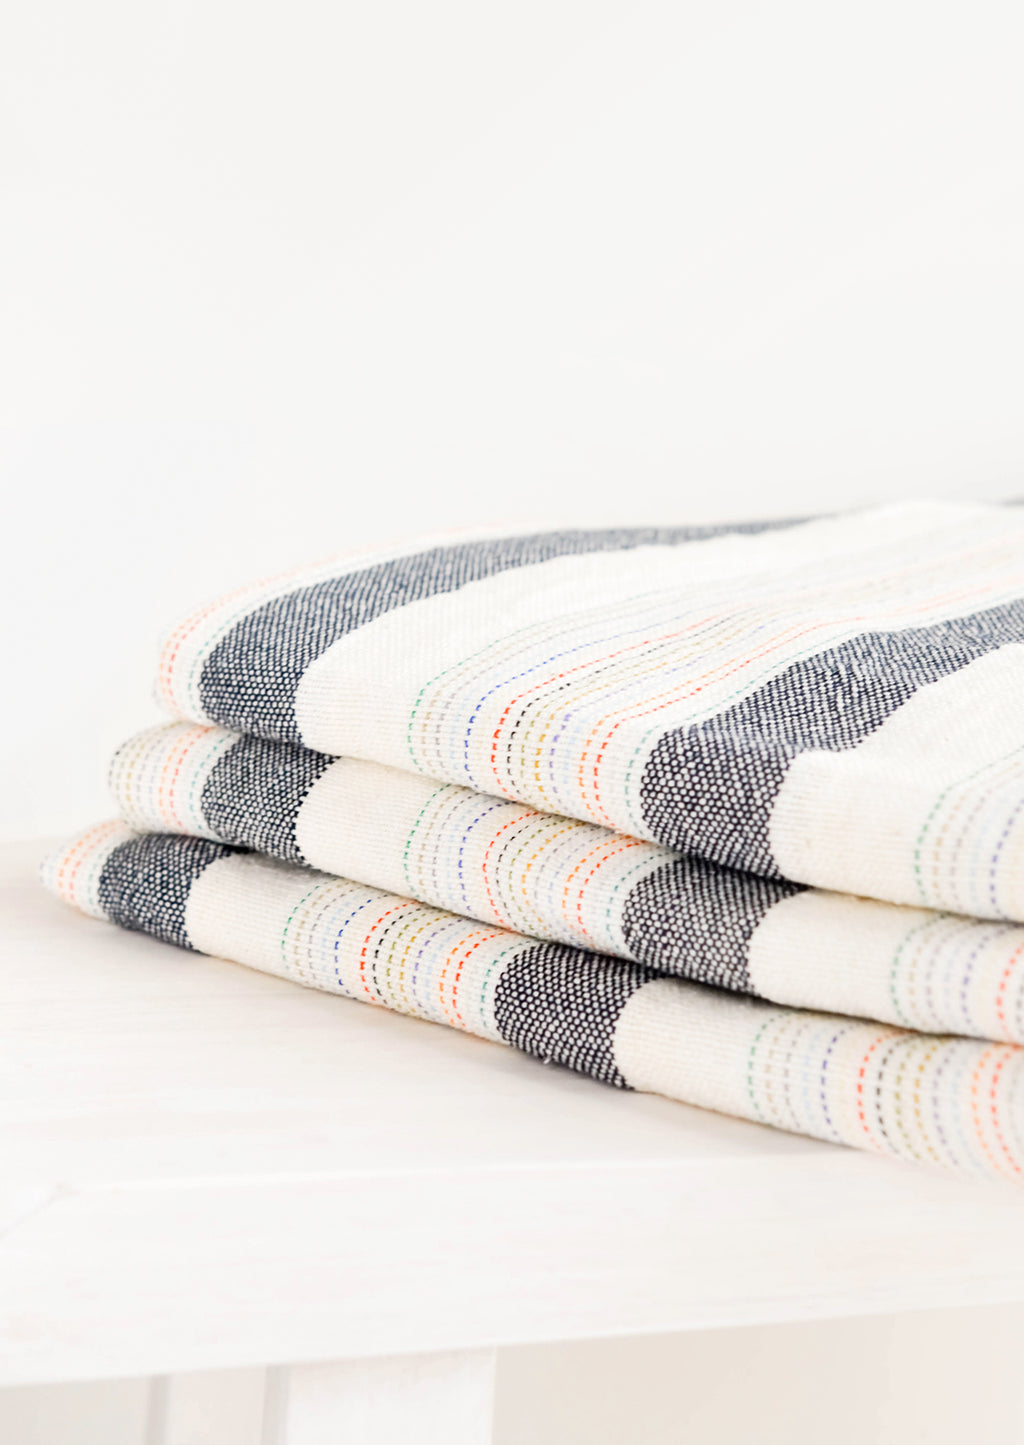 2: Stack of Cotton Turkish Towel in Natural & Charcoal with Rainbow Colored Stitching - LEIF